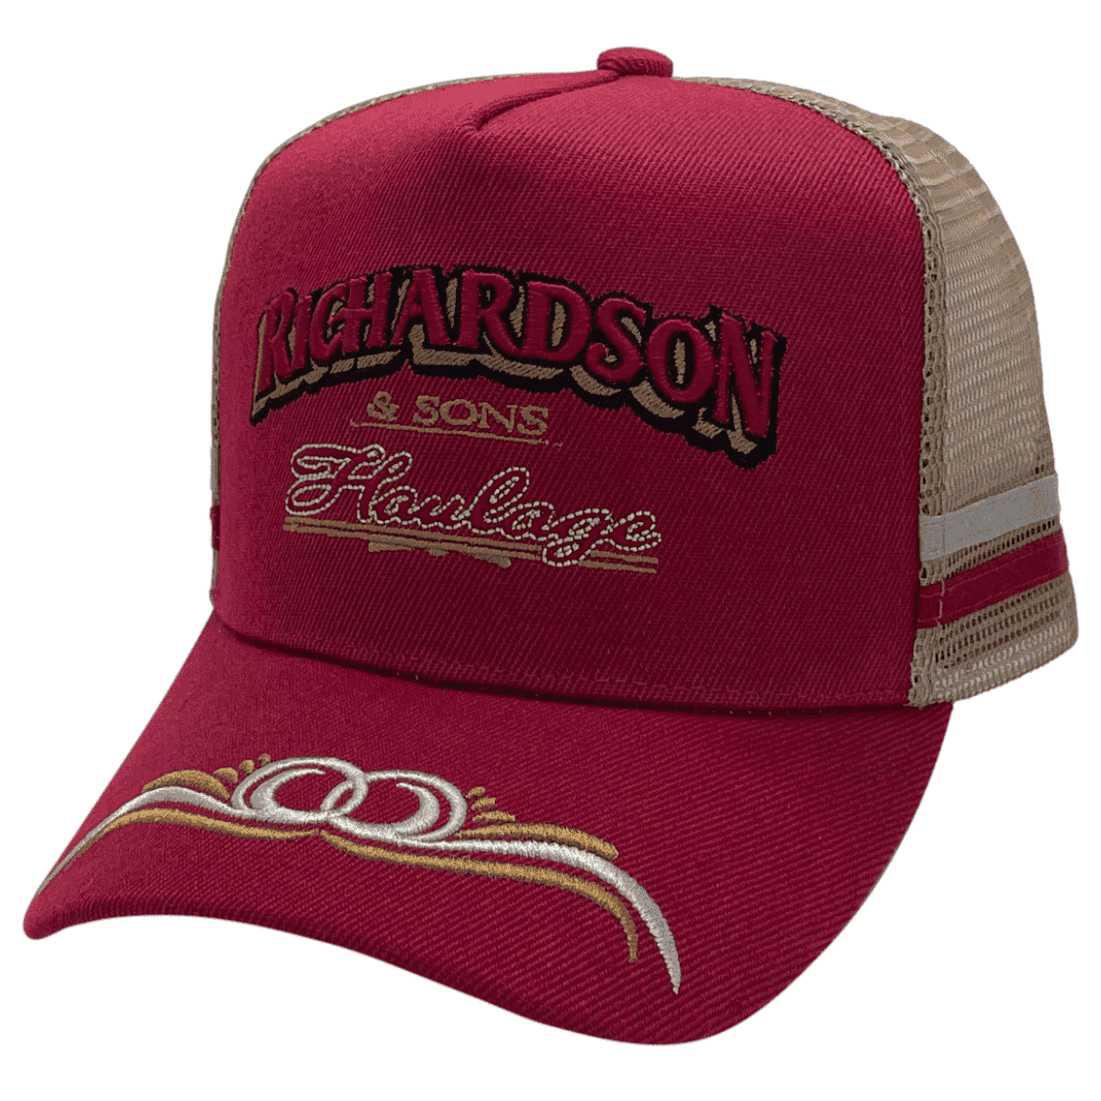 Richardson and Sons Haulage Henty NSW HP Original Power Aussie Trucker Hat with double side bands and Australian Head Fit Crown